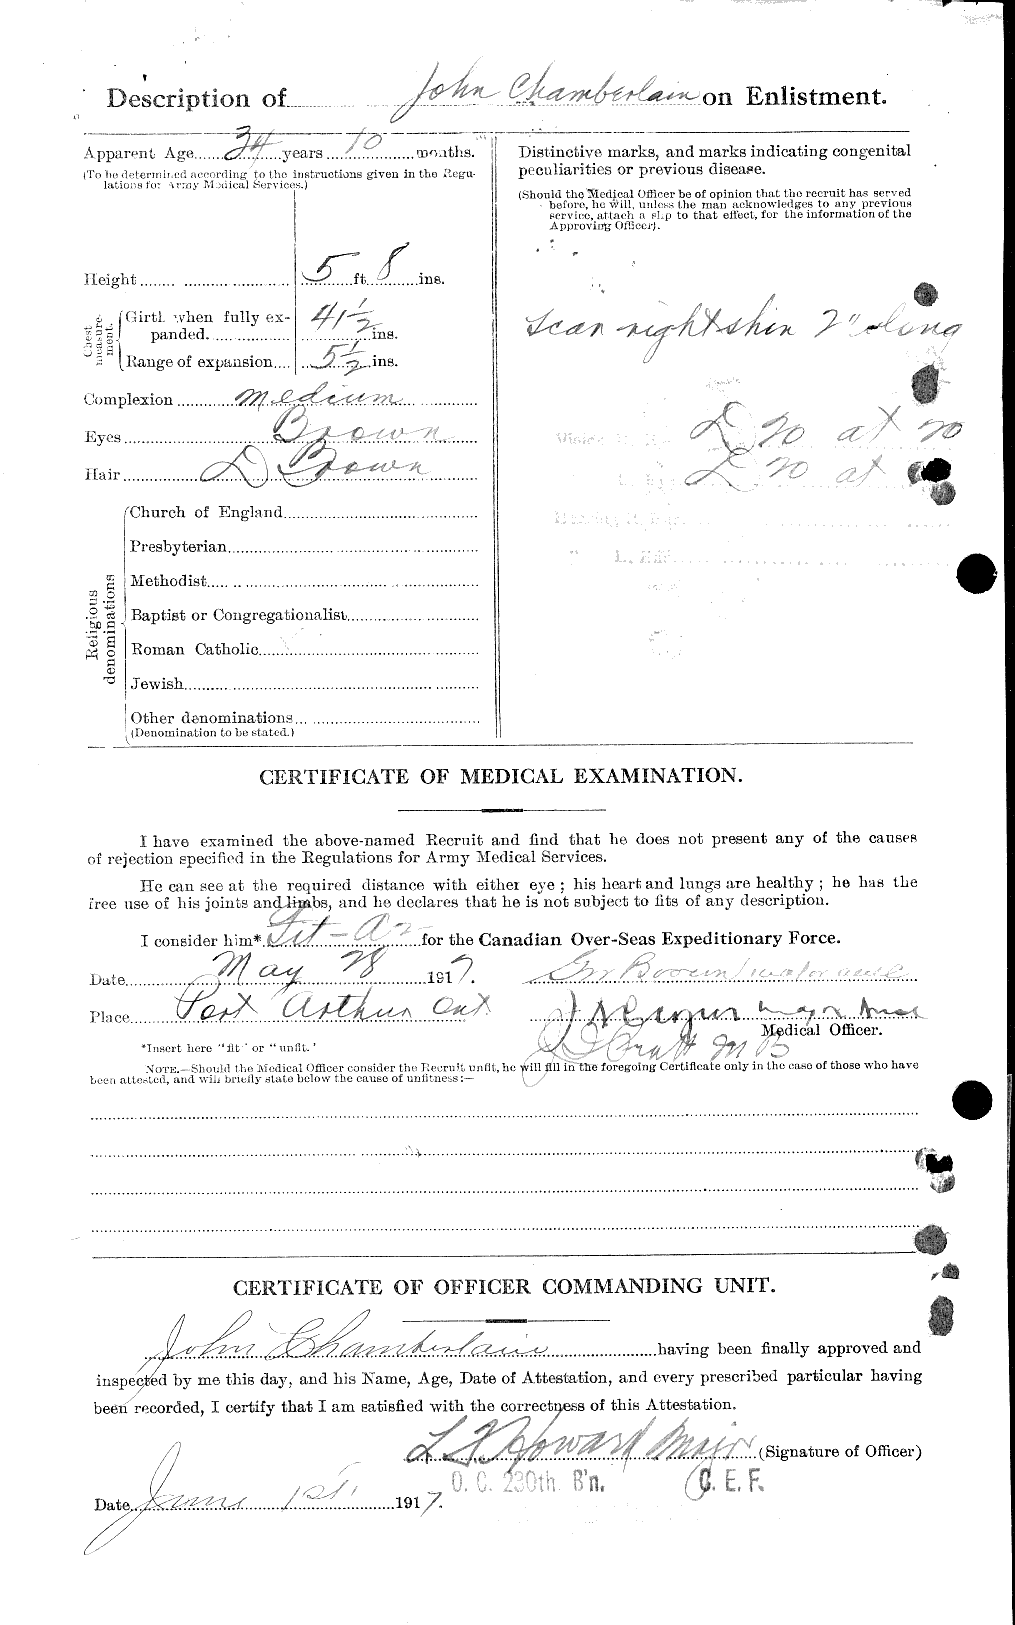 Personnel Records of the First World War - CEF 019590b